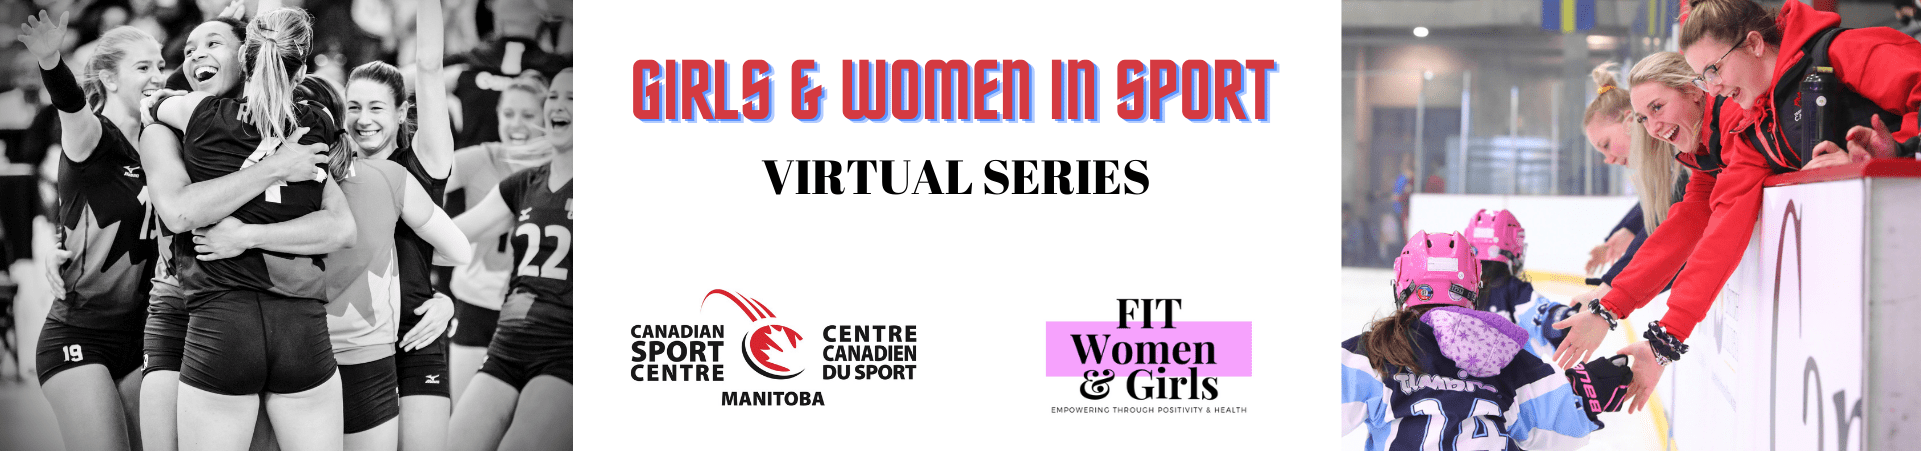 Girls and Women in Sport - Virtual Series